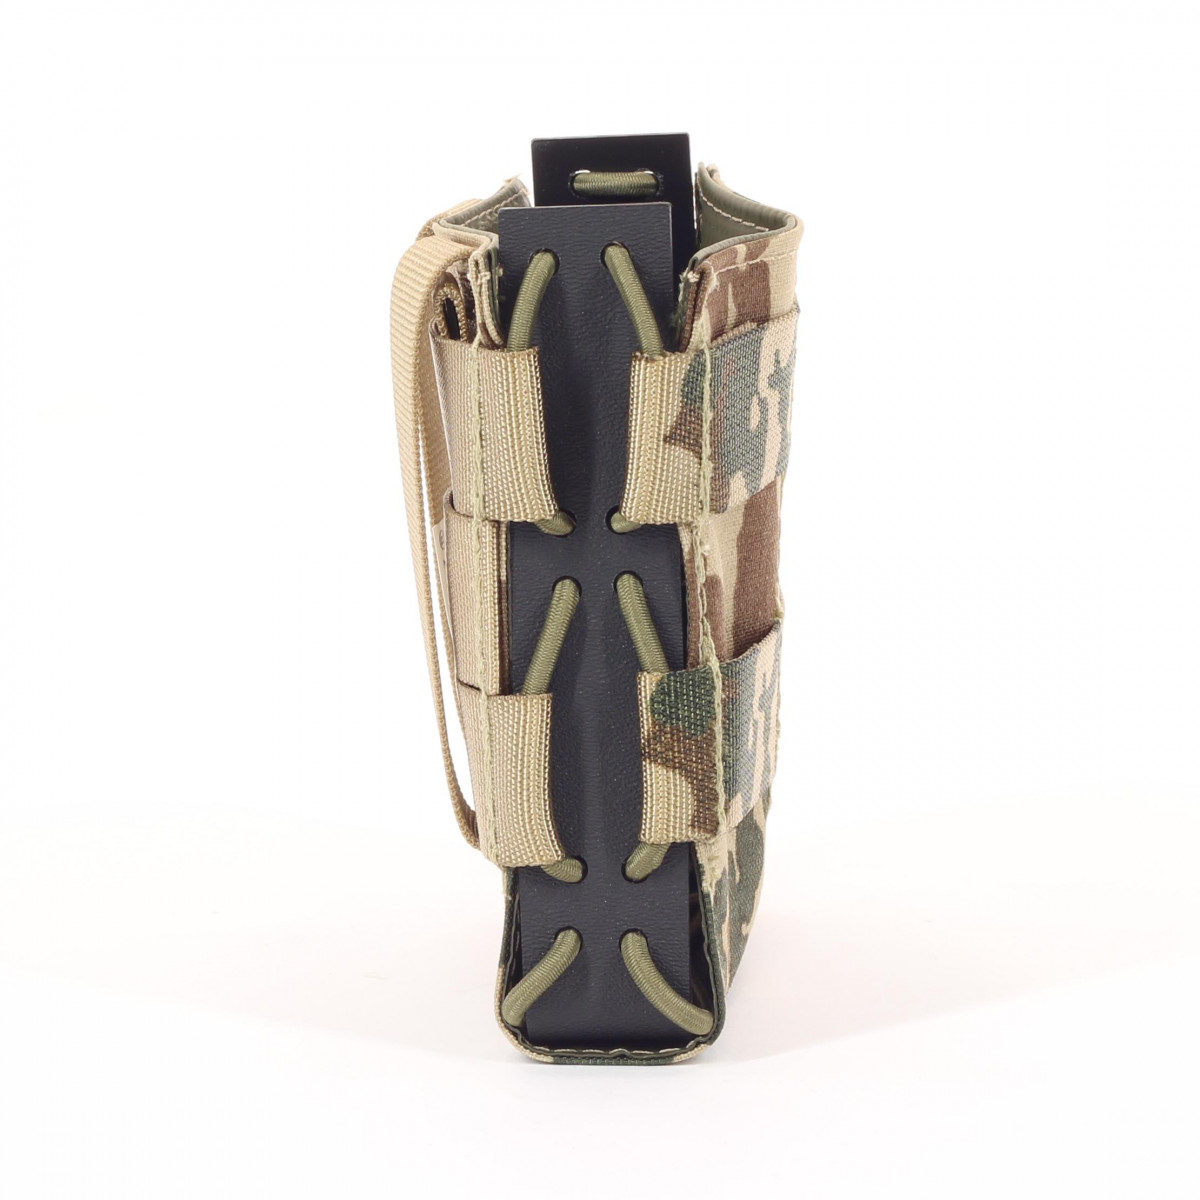 Quick-draw magazine pouch G28 and HK417 in tropical camouflage